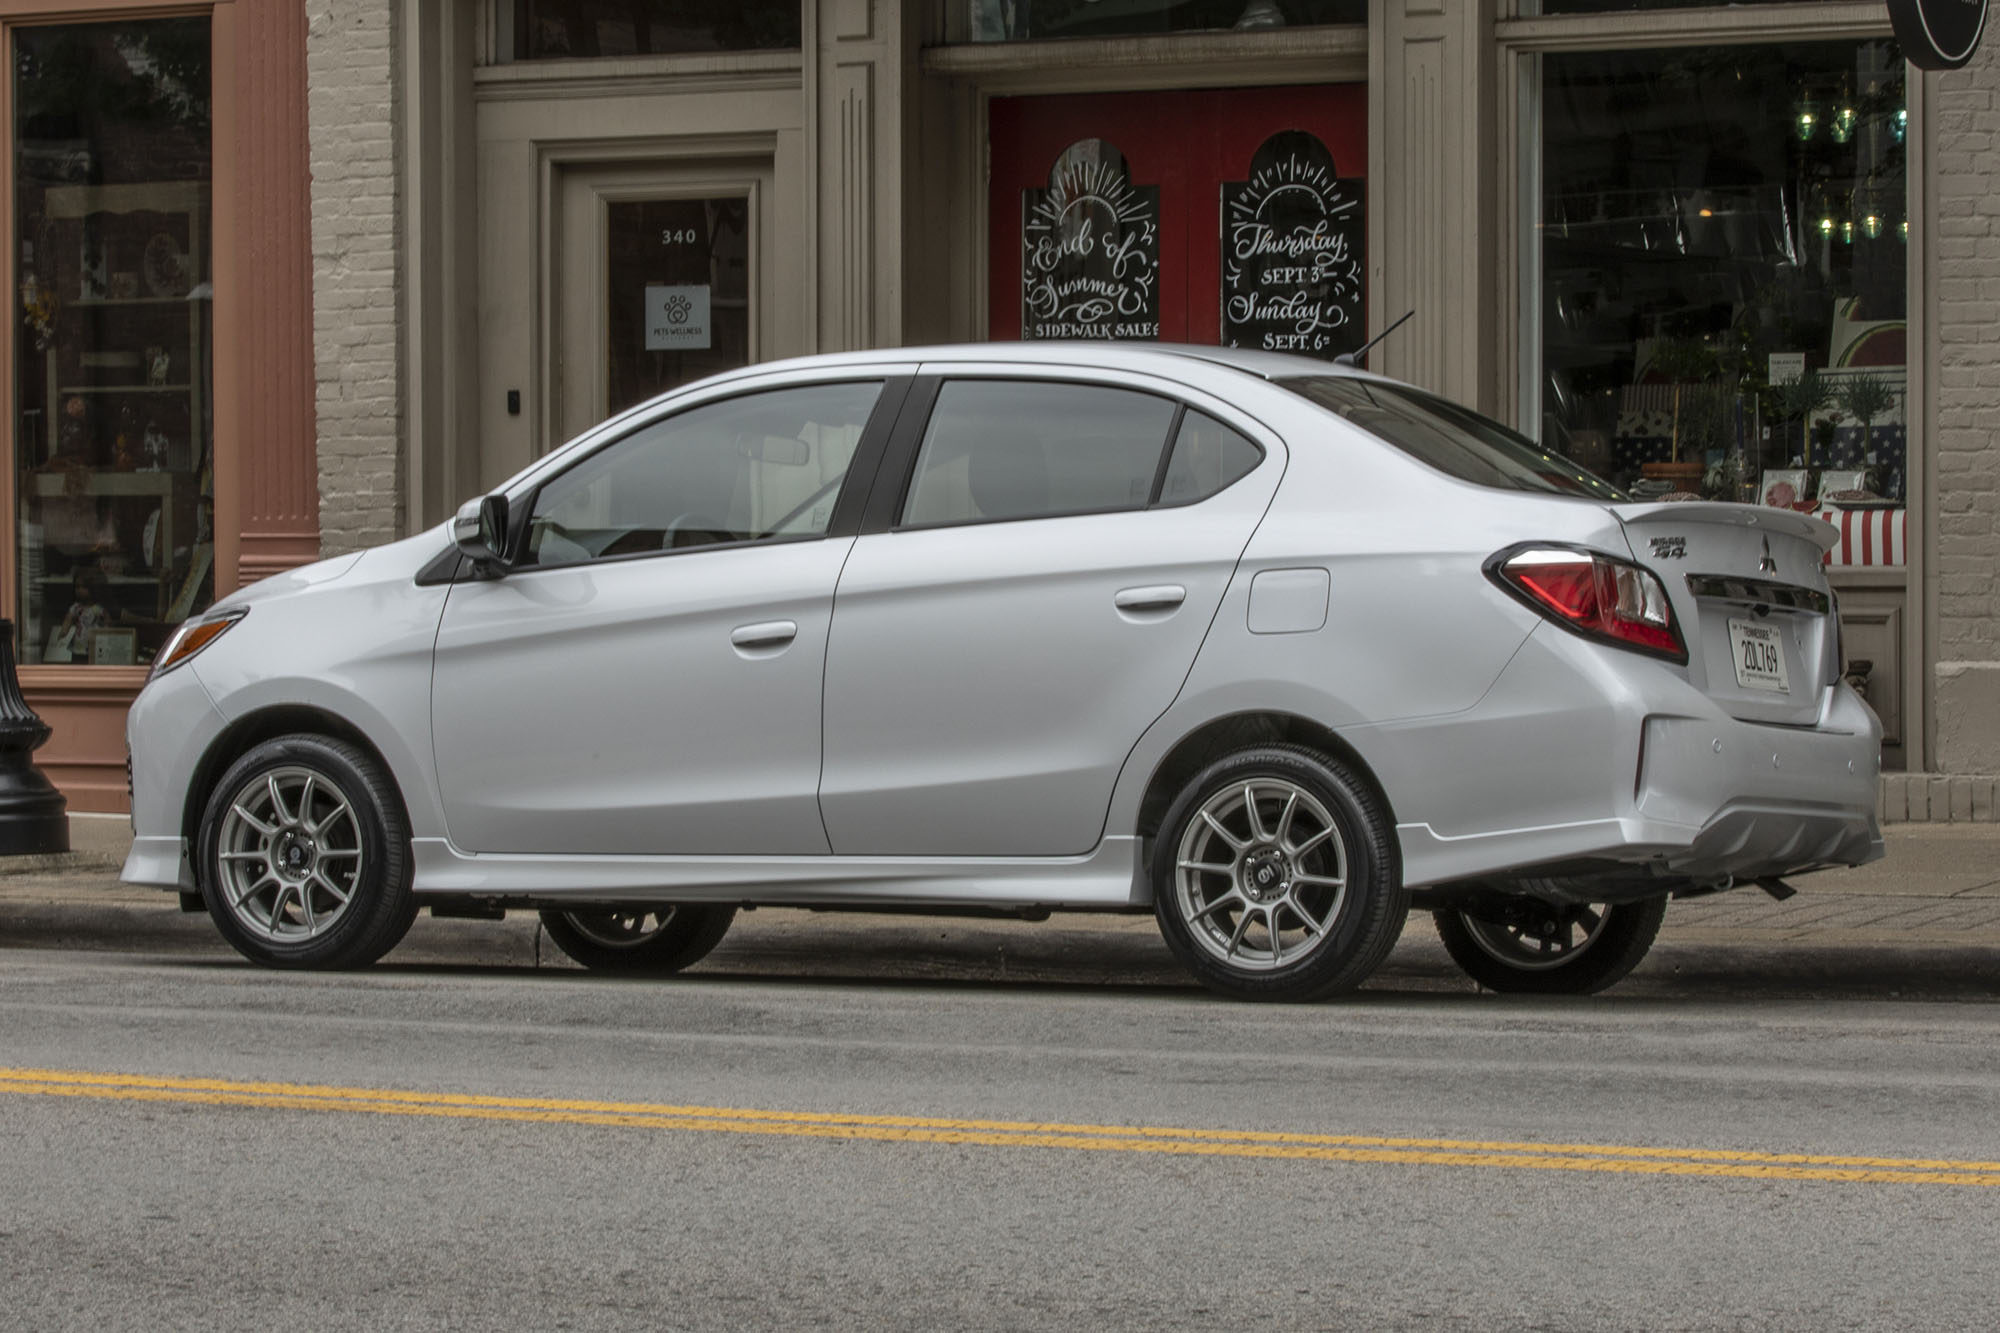 Left rear quarter view of a gray 2024 Mitsubishi Mirage G4 parked on a city street